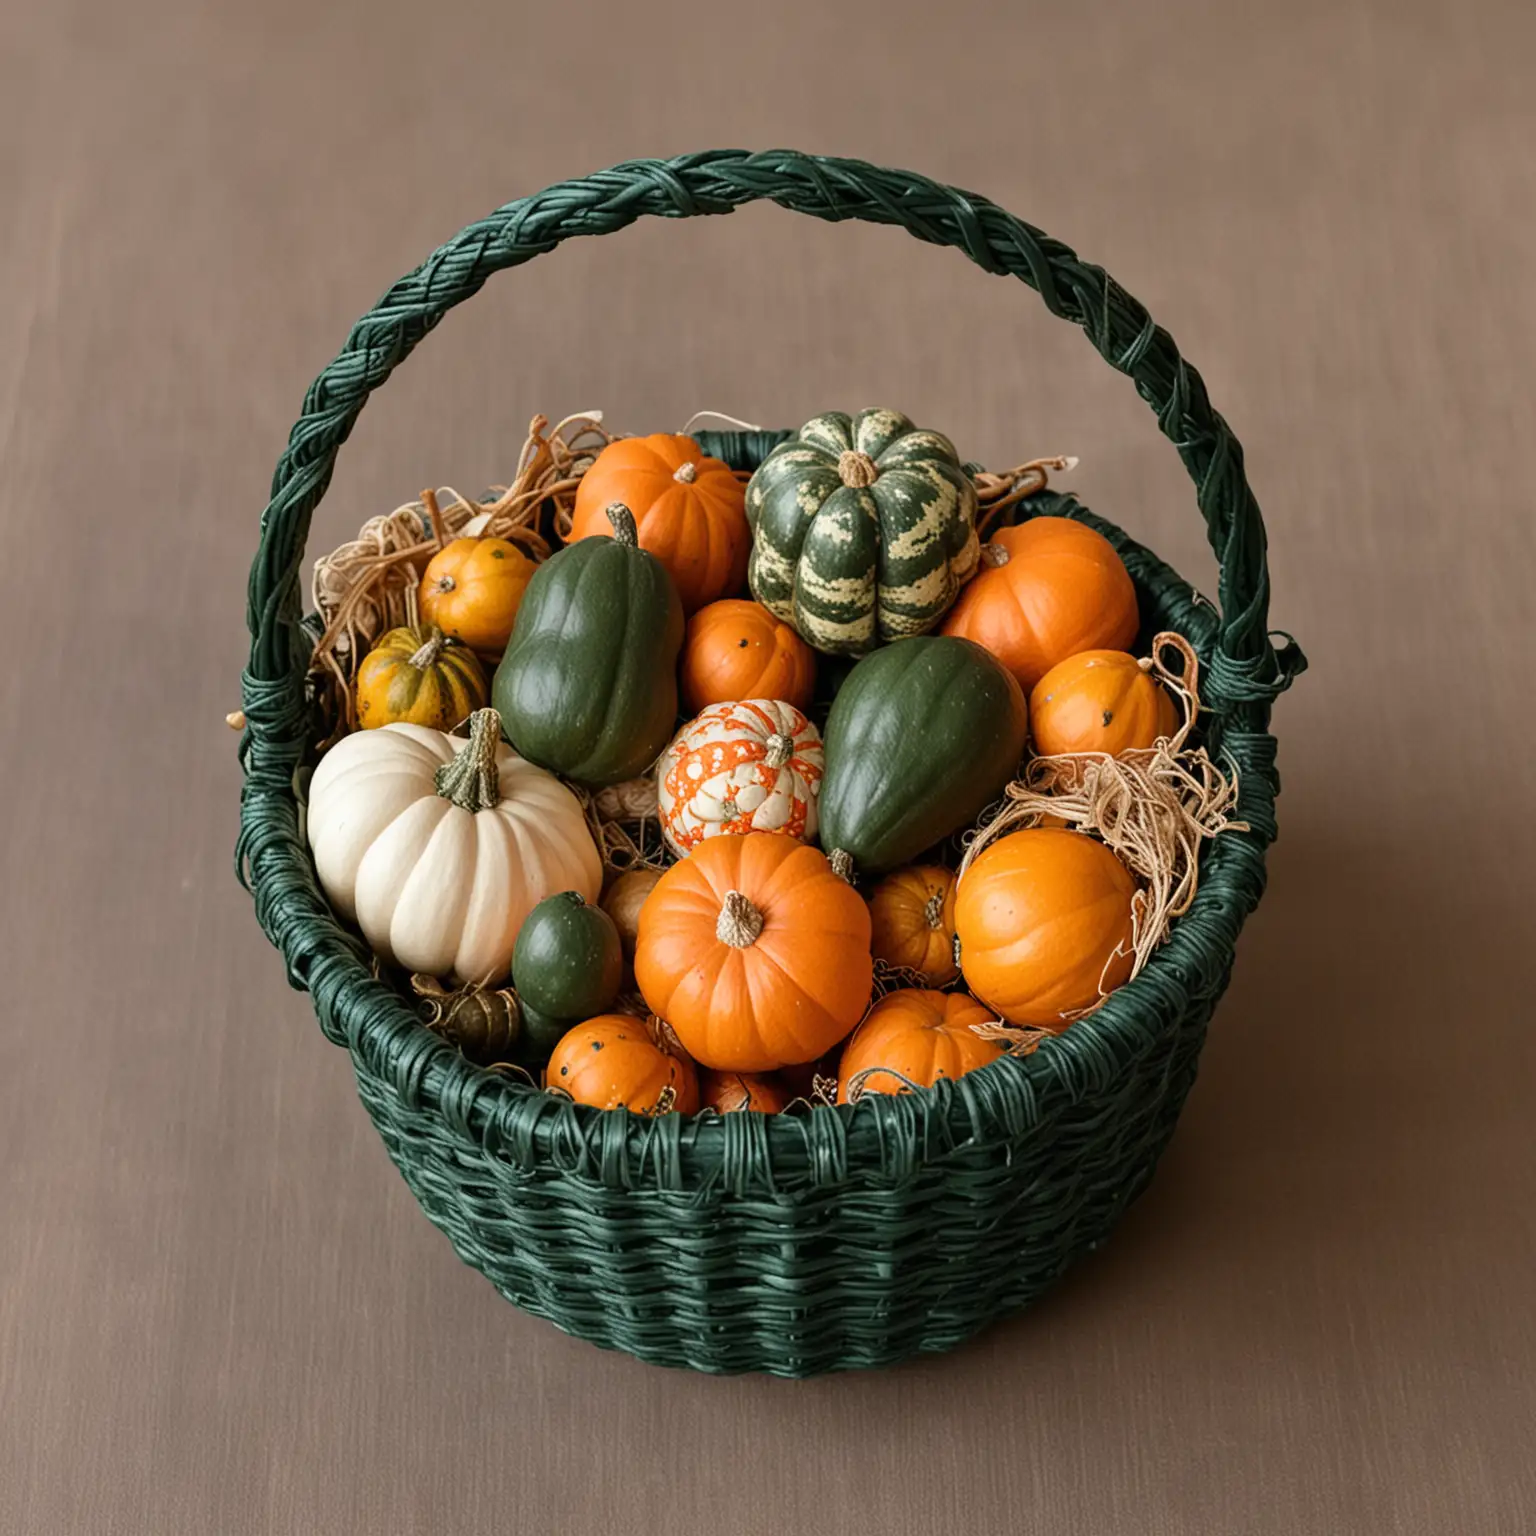 Small-Handwoven-Garden-Basket-Filled-with-Mini-Pumpkins-and-Gourds